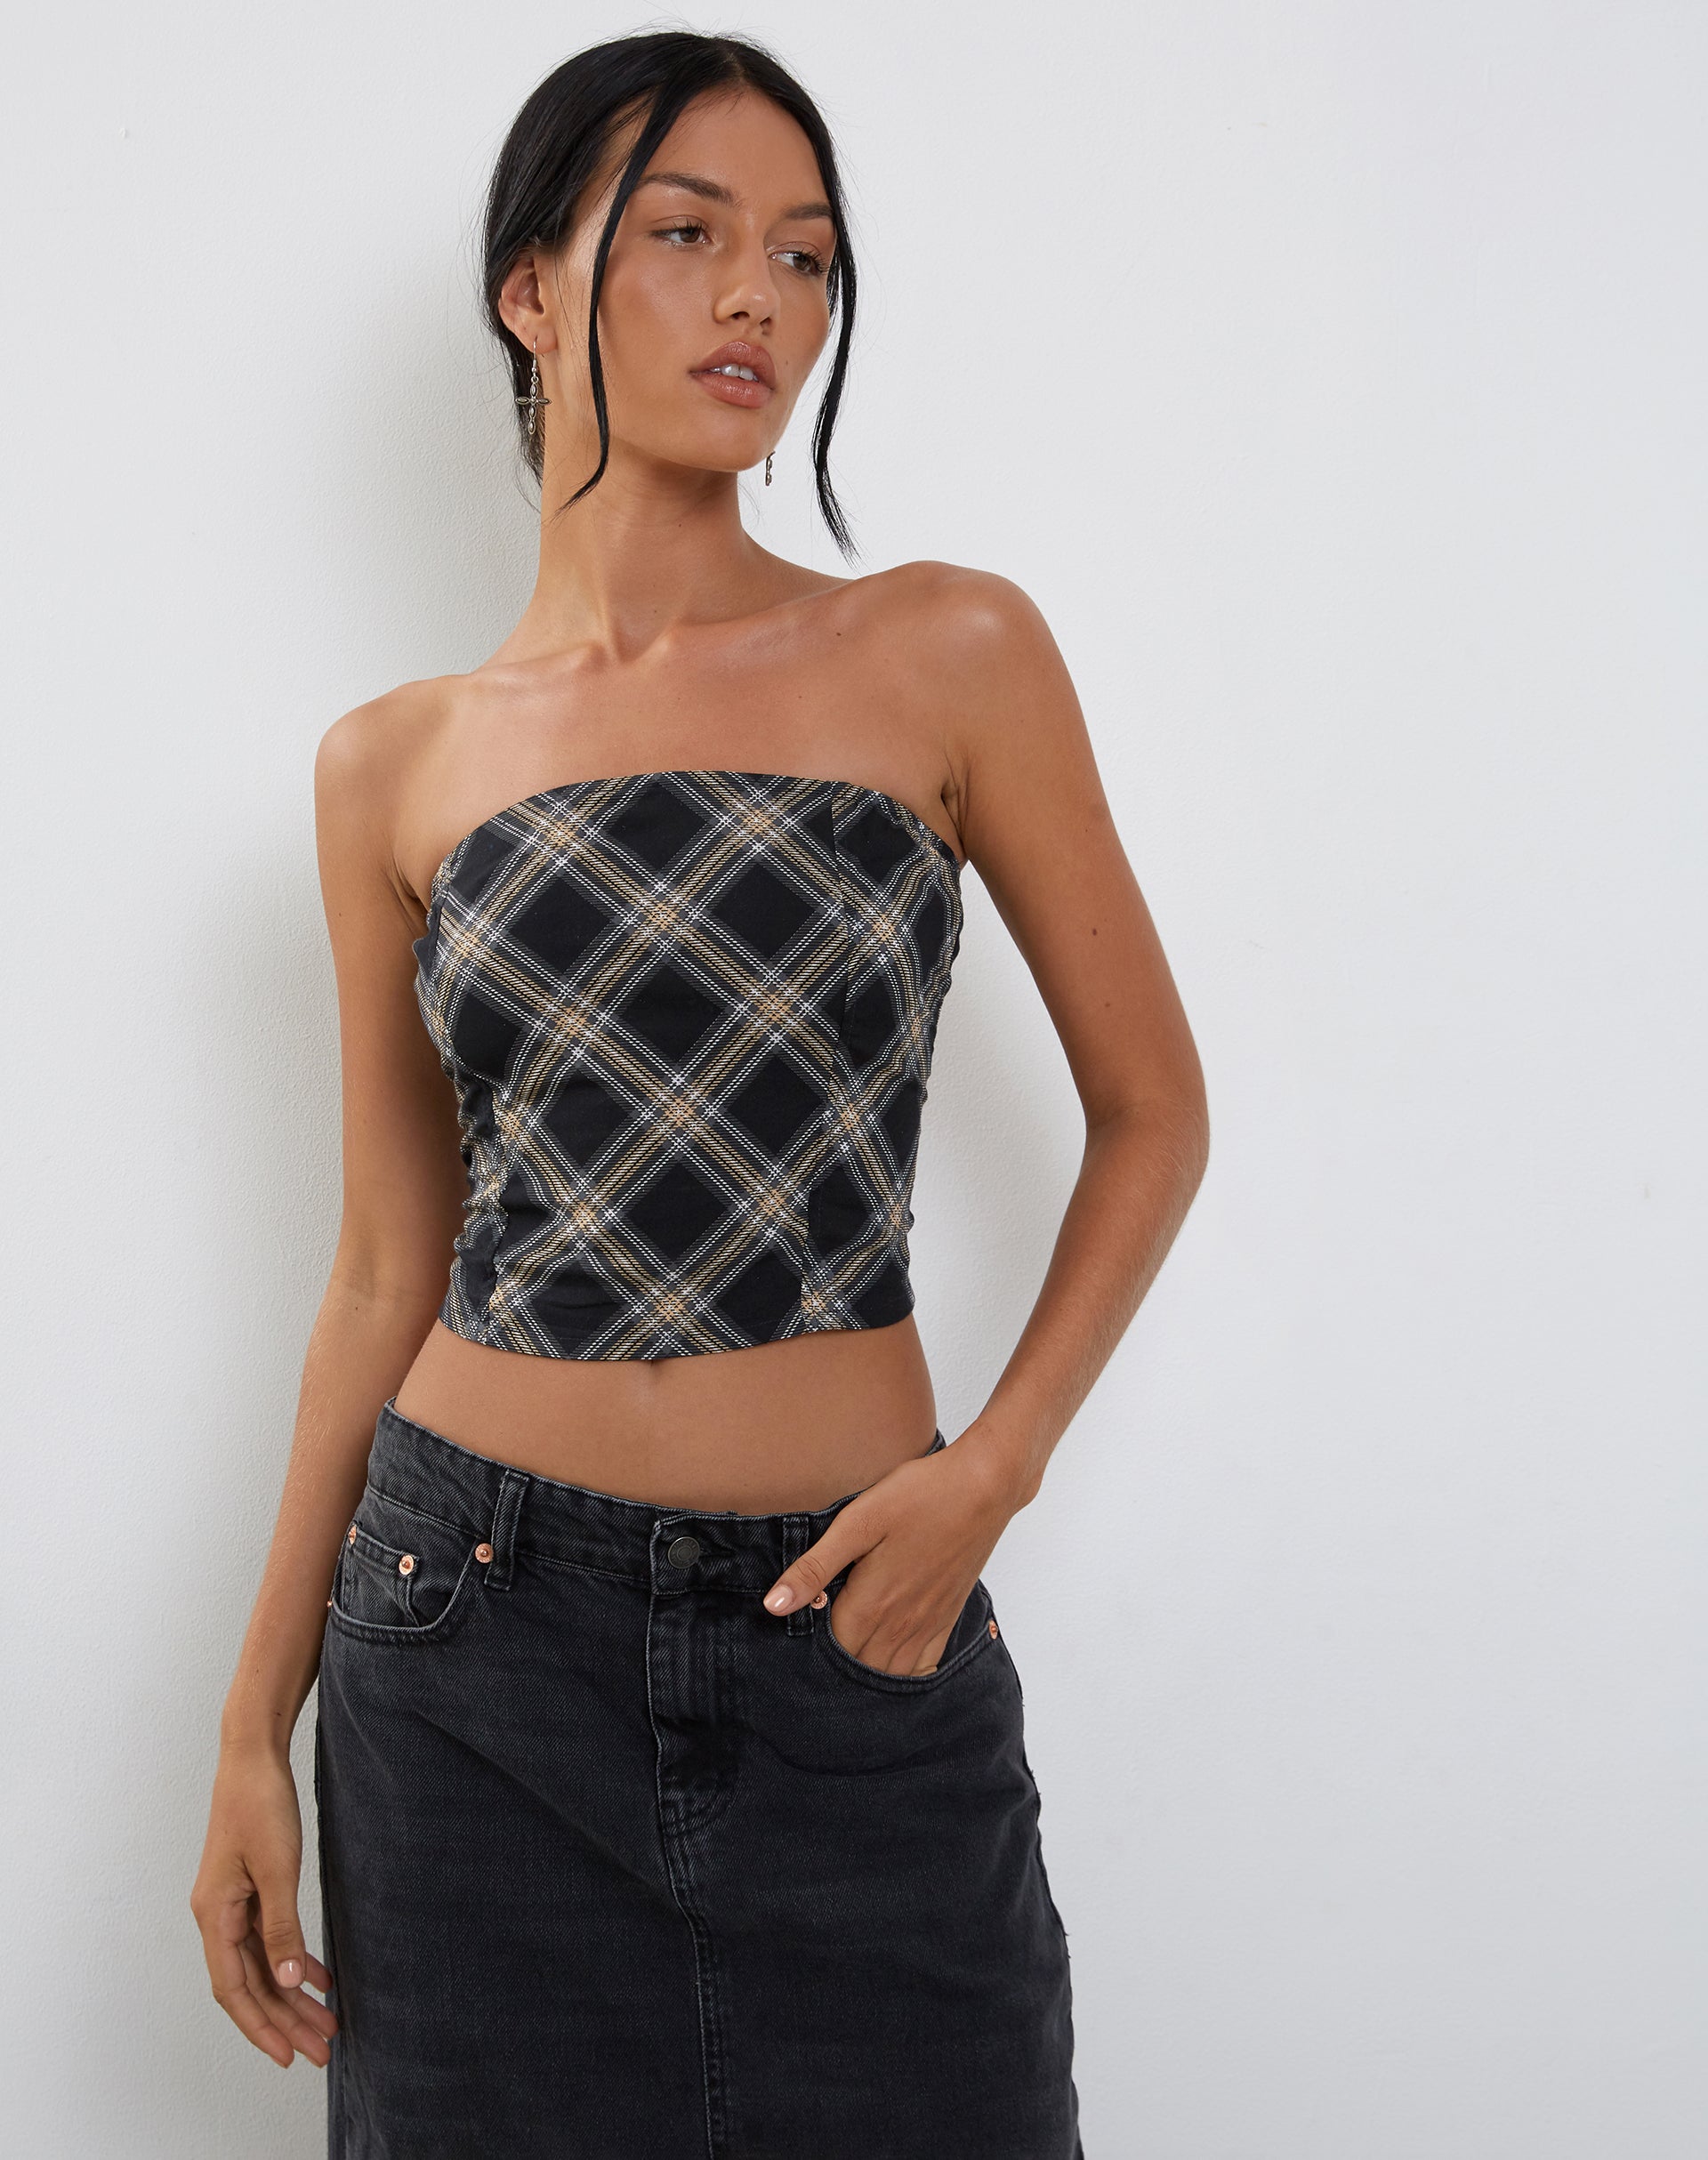 Image of Shaloe Bandeau Top and Scarf Set in 20's Check Black and Grey